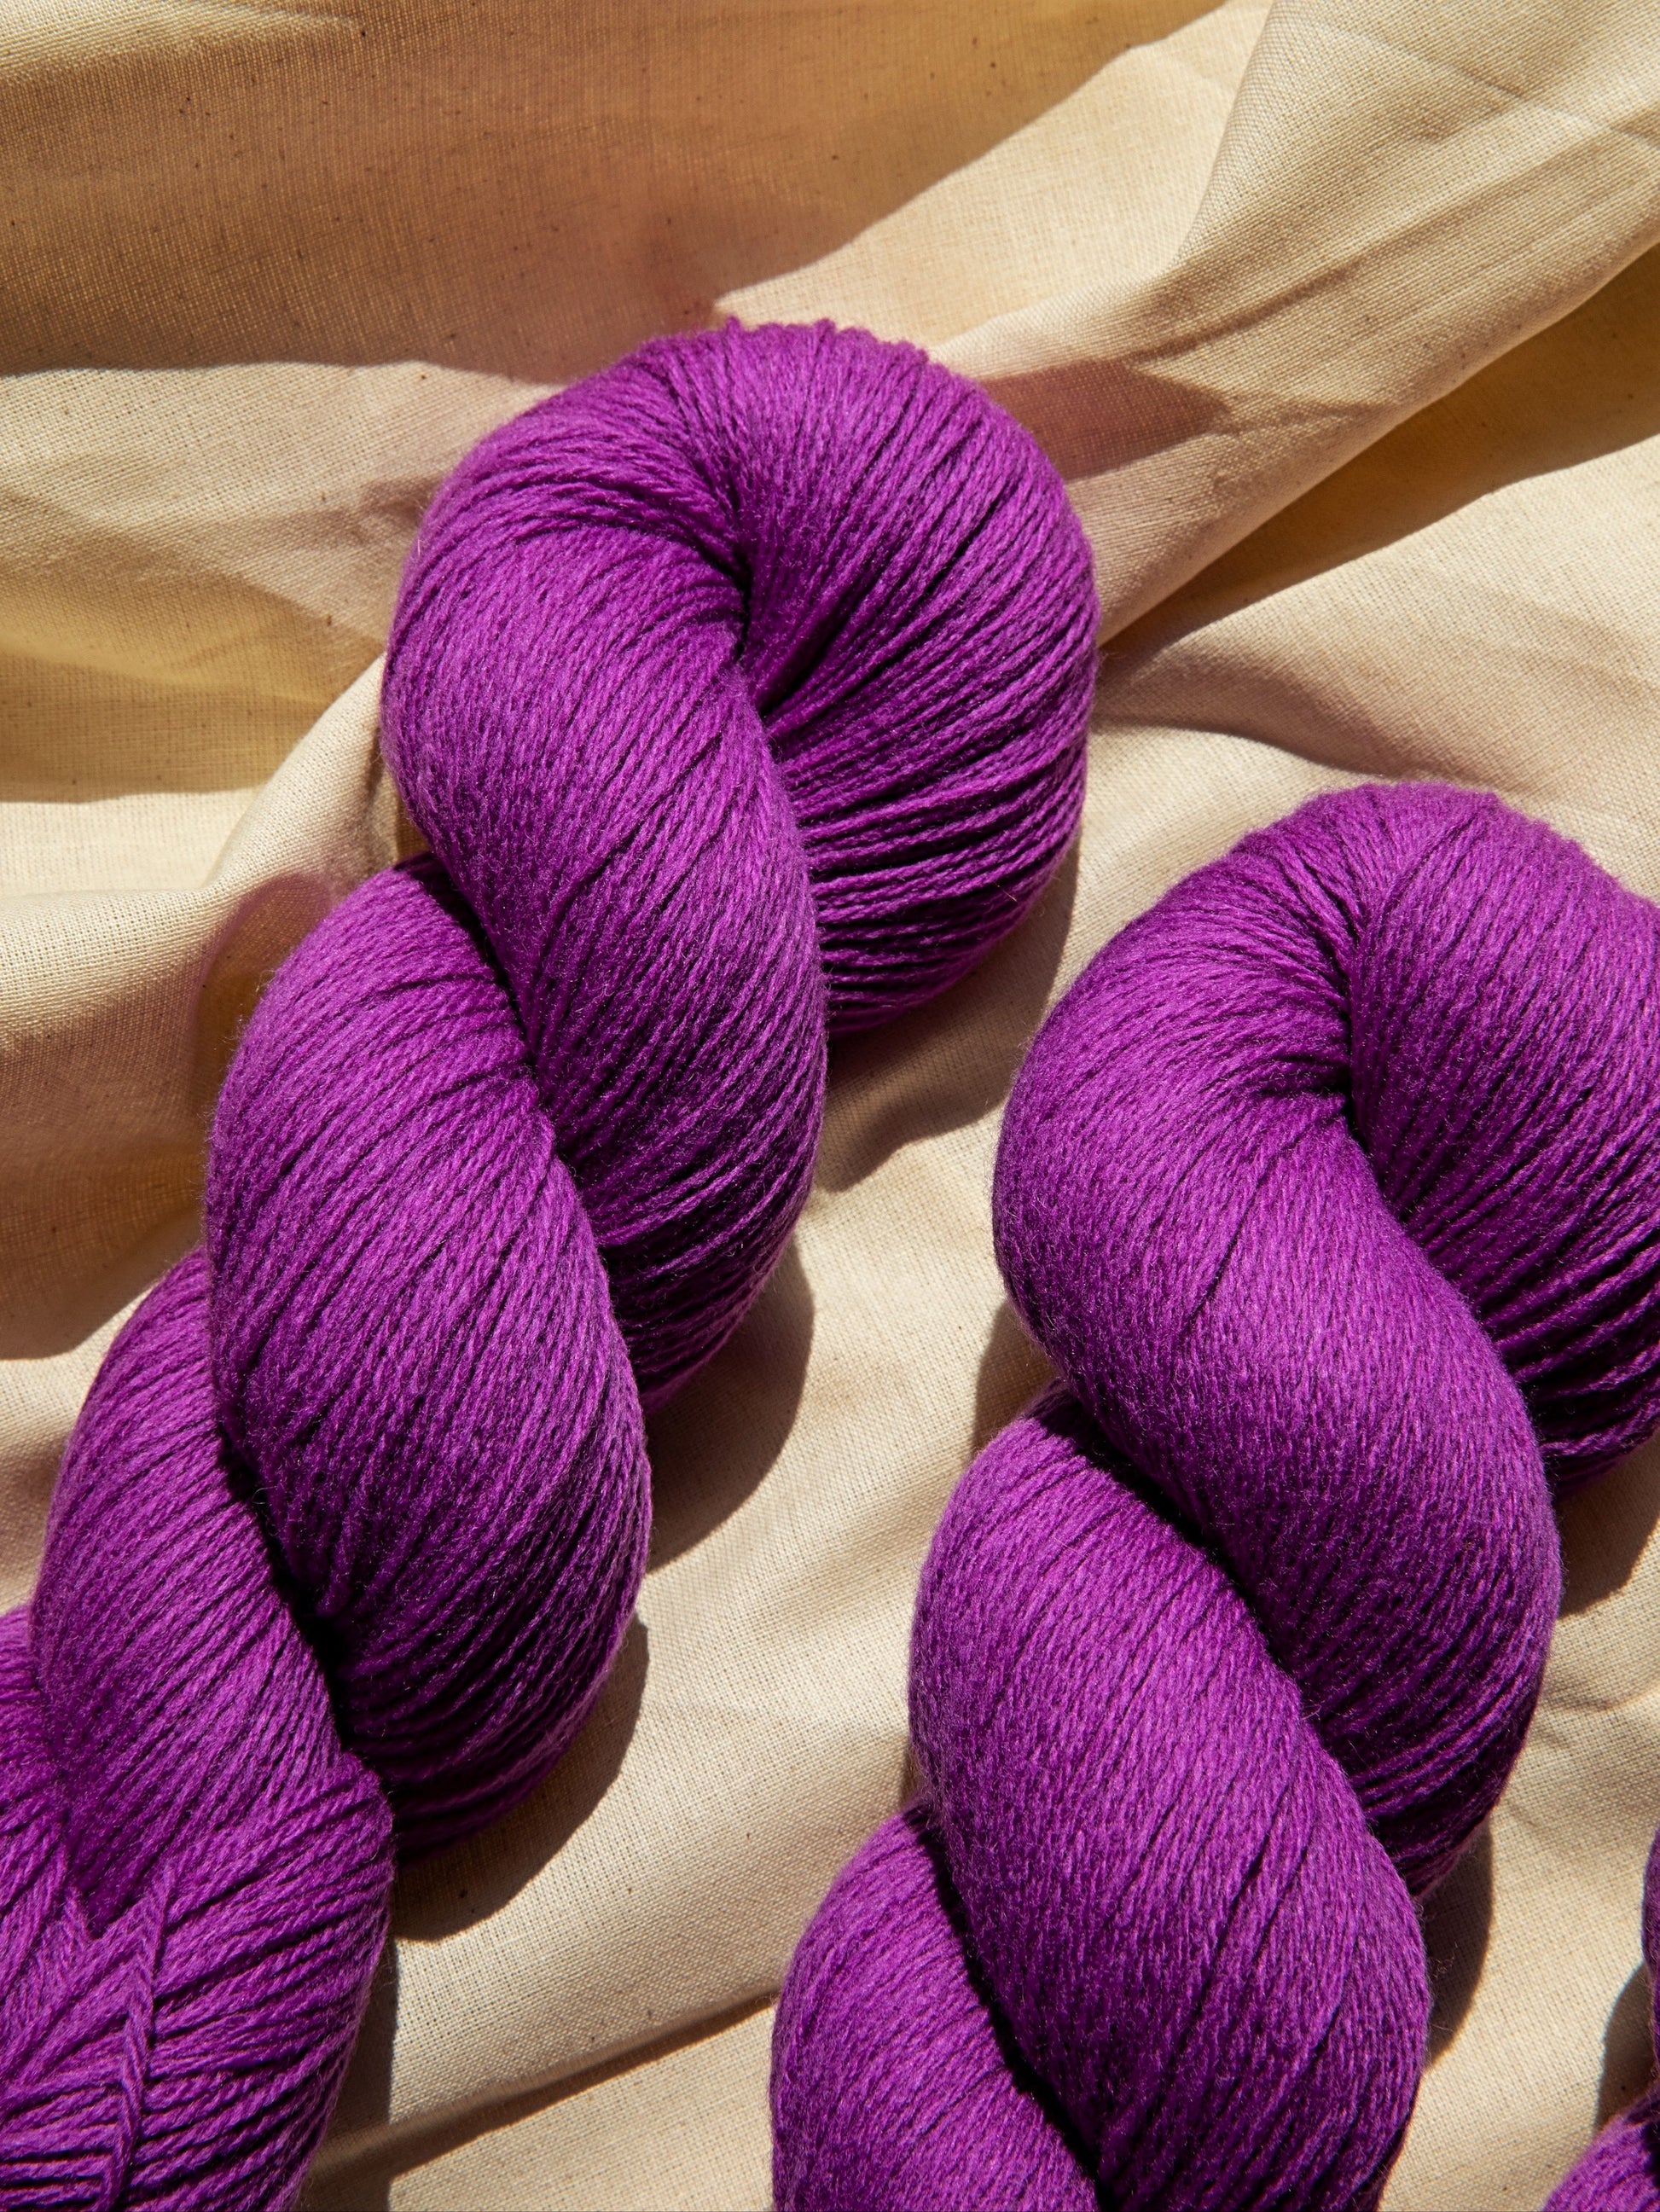 Fjord Lambswool Yarn - Qing Fibre - Indie Hand-Dyed Yarn